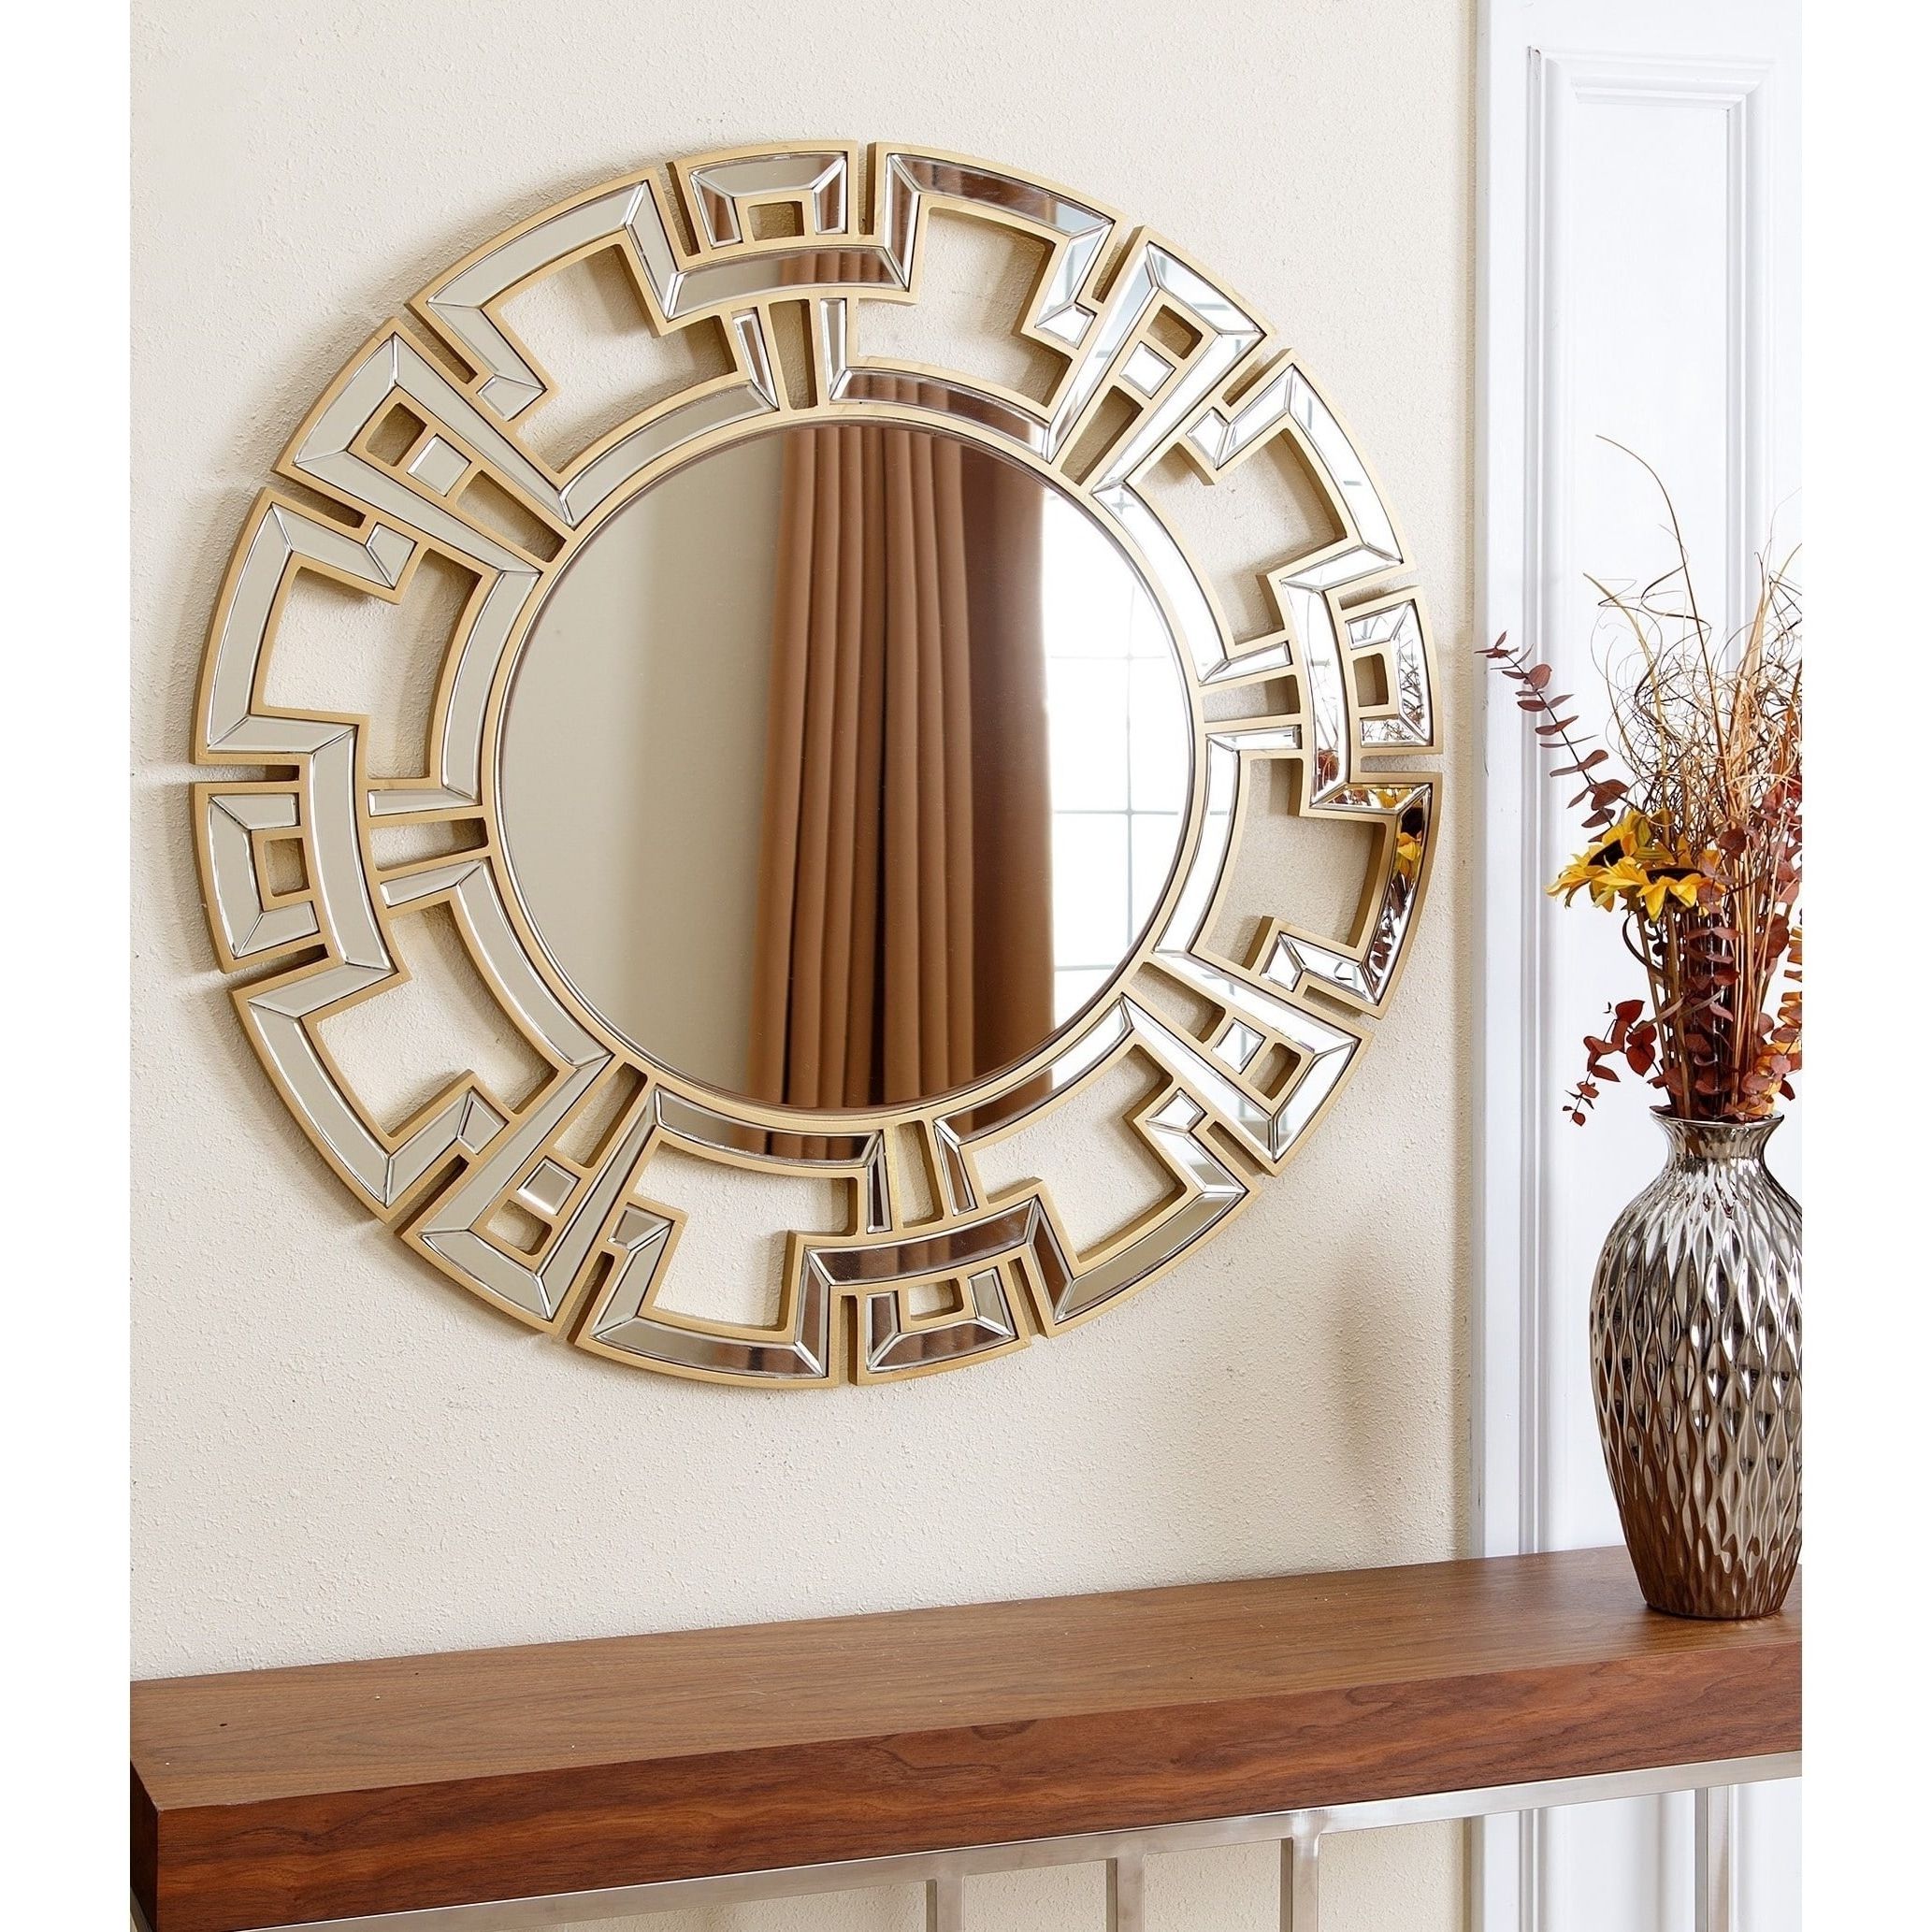 Organic Natural Wood Round Wall Mirrors Regarding Most Recent Abbyson Wall Mirror Accent Gold Wood Round Crafted Entryway Mounted (View 15 of 15)